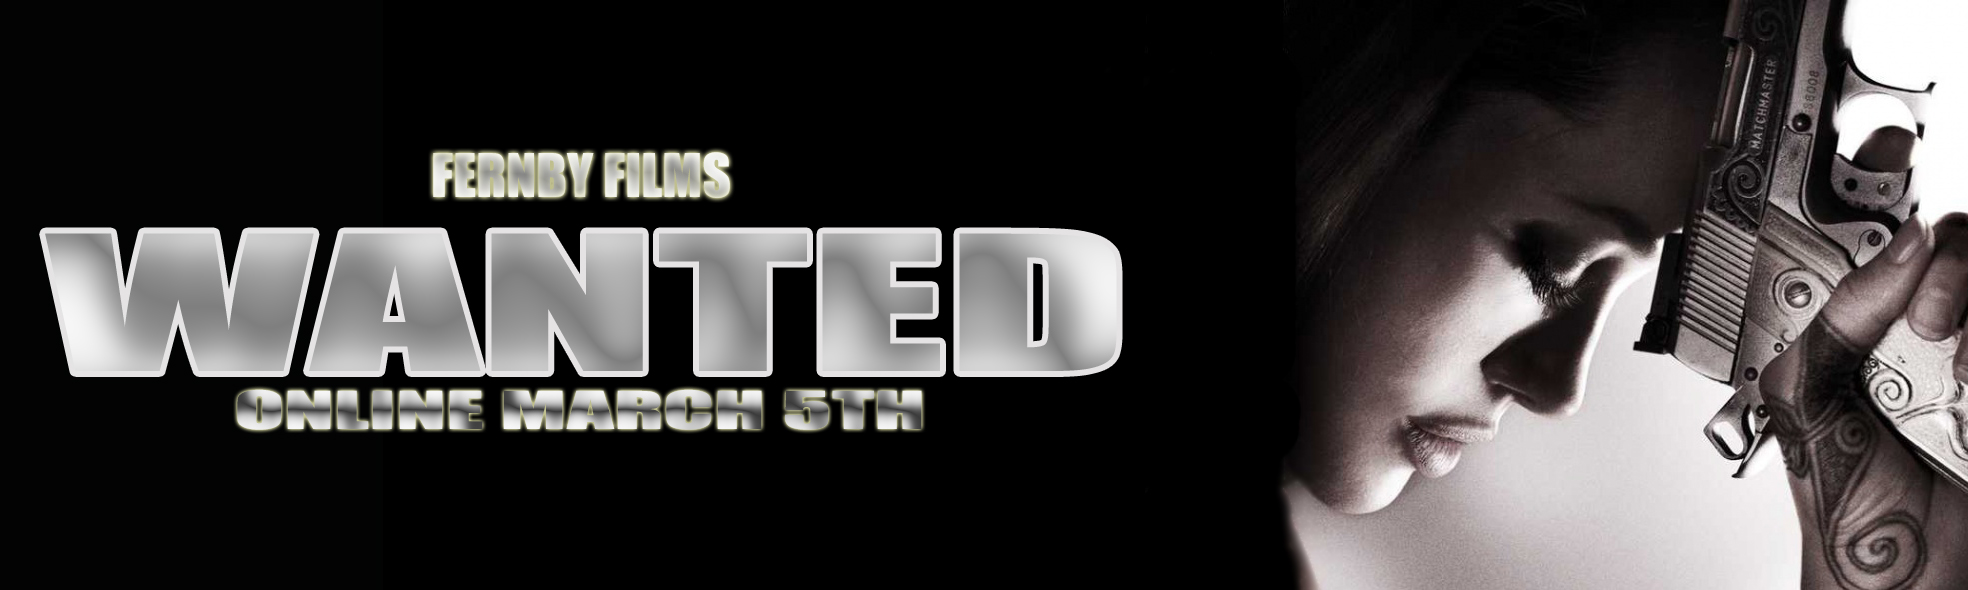 wanted-promo-5